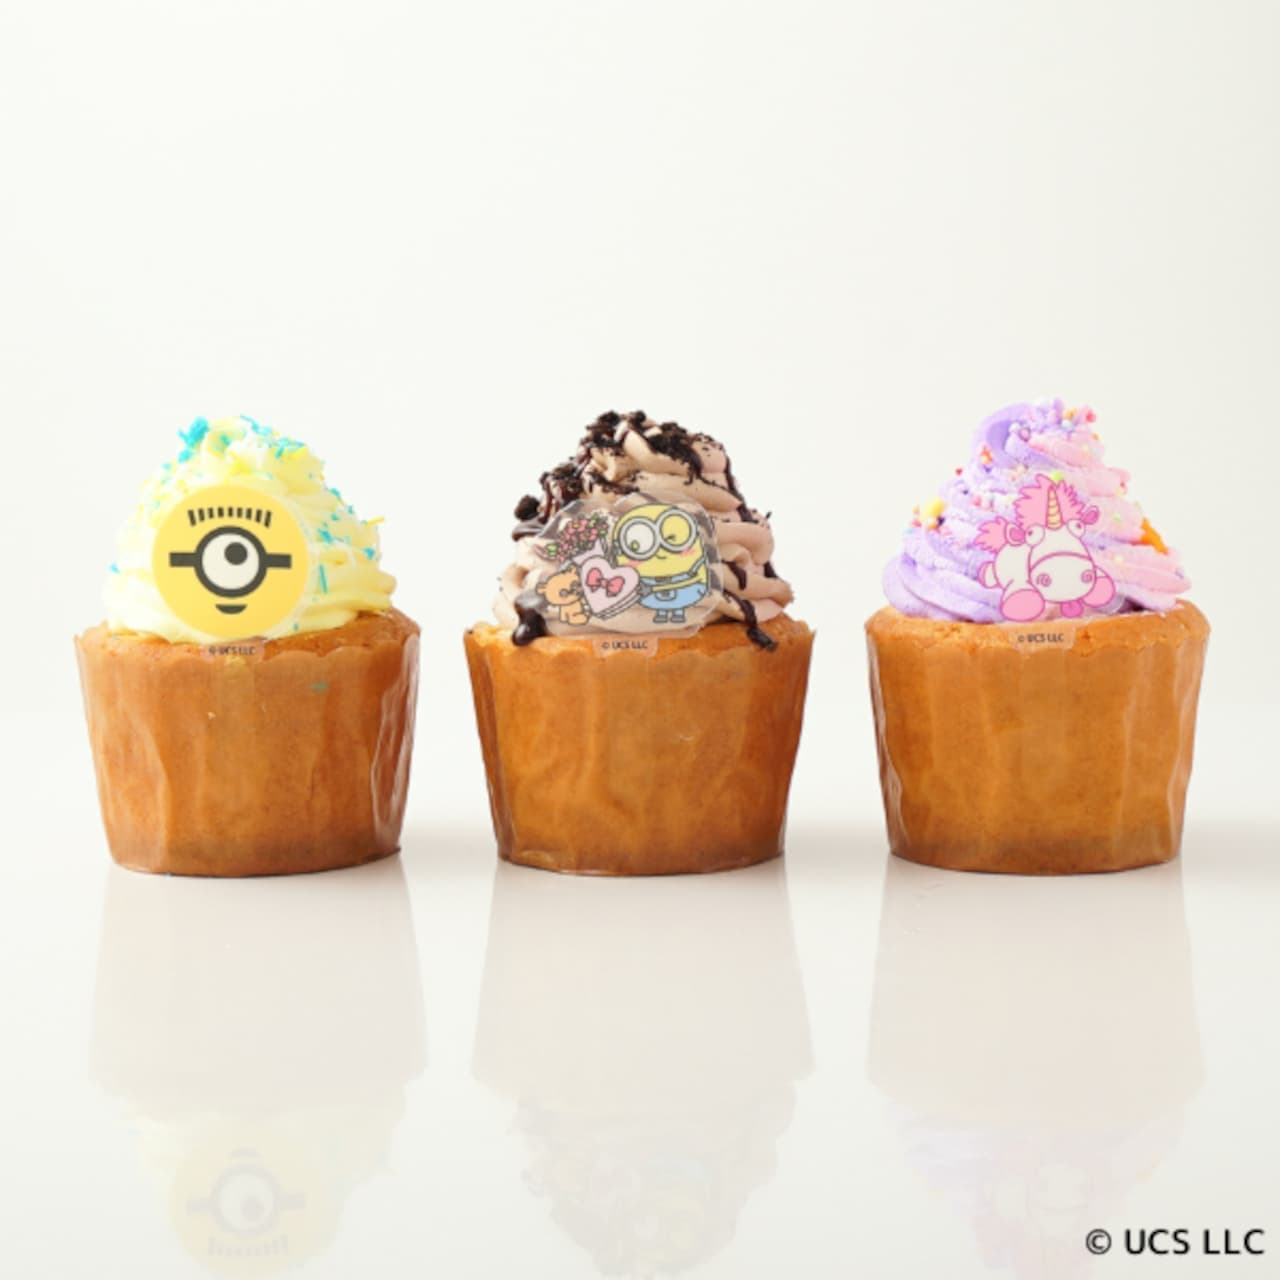 Minion Happy Sweets Shop "Cupcake with Original Pick